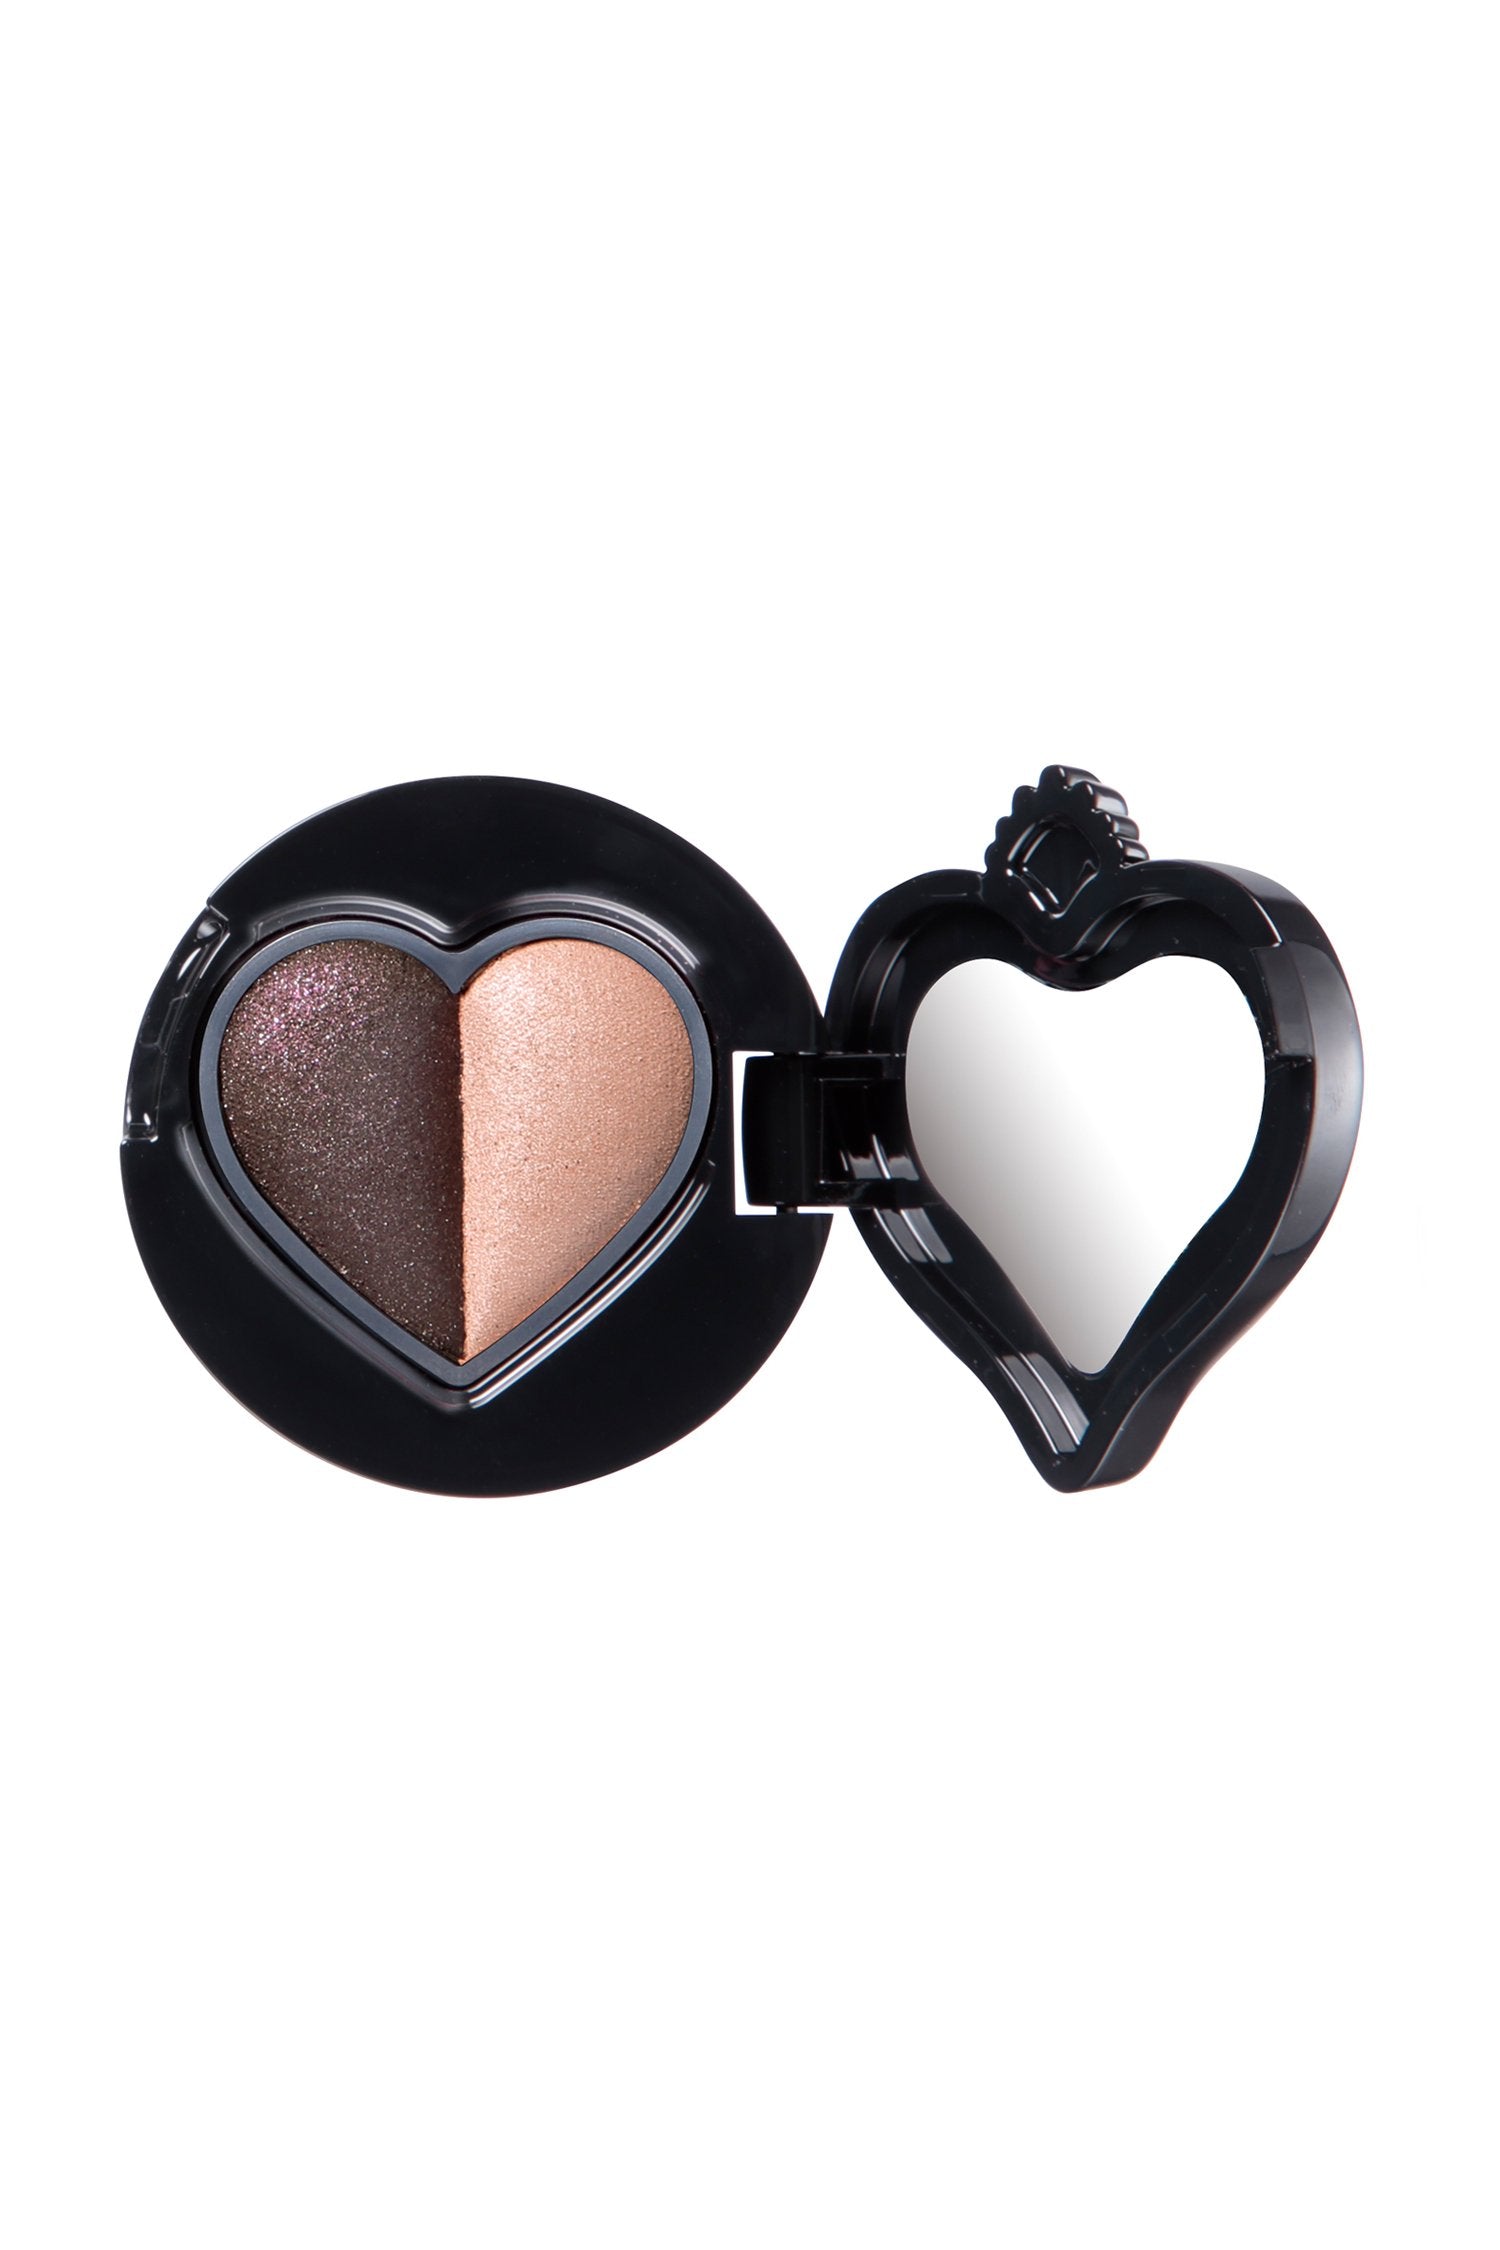 Sui black eye color 300 FUNKY PINK DUO Round Black container with a heart shaped lid with a mirror inside 